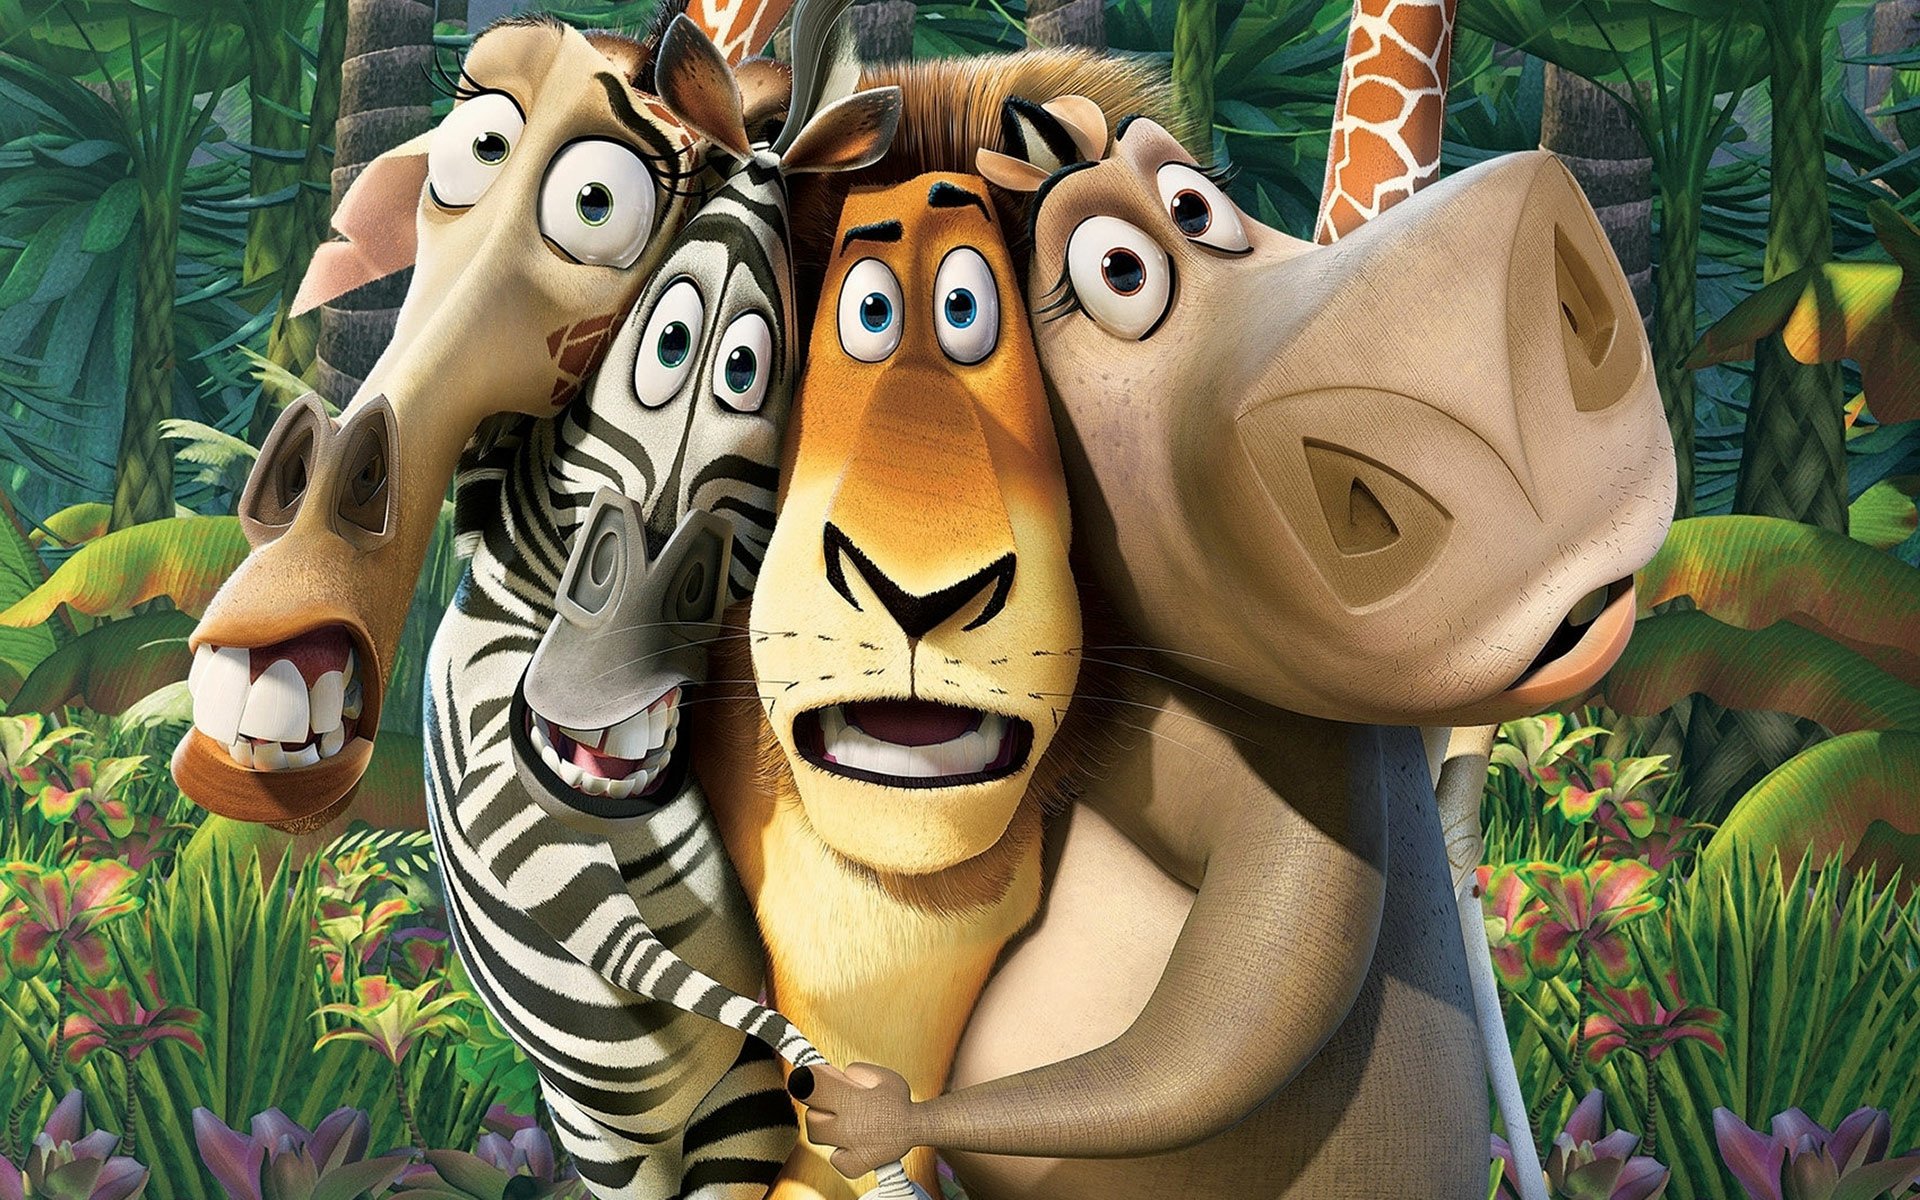 20 Madagascar Movie Hd Wallpapers Background Images Images, Photos, Reviews